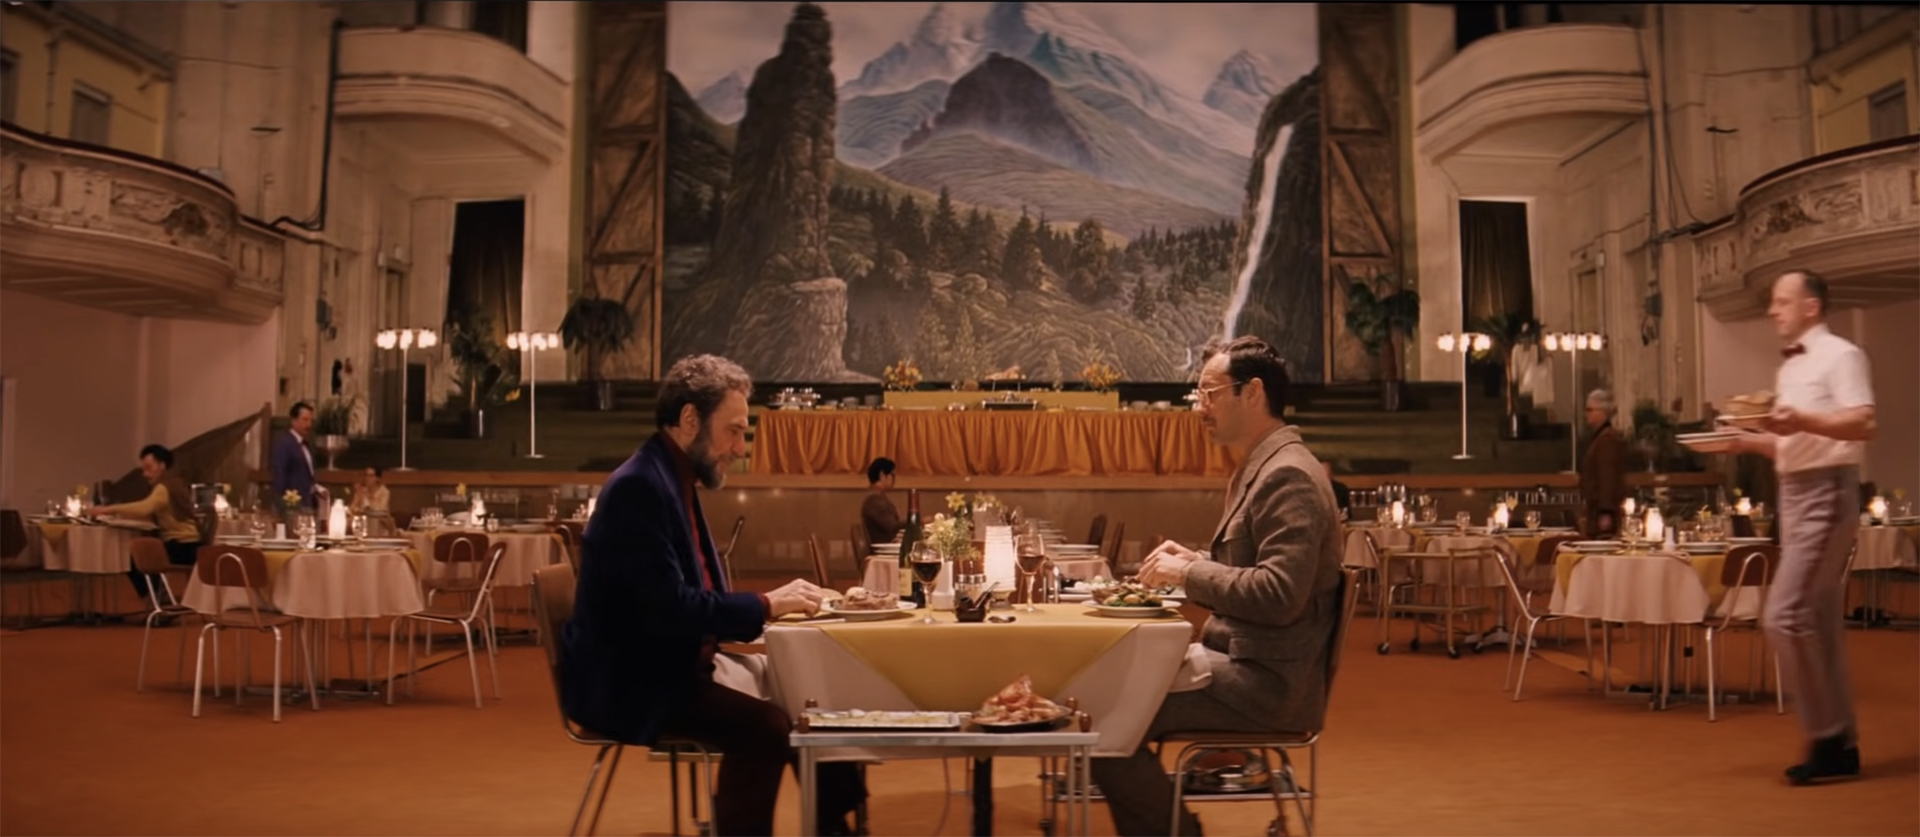 aspect ratio as a storytelling tool - 3 different aspect ratios in The Grand Budapest Hotel